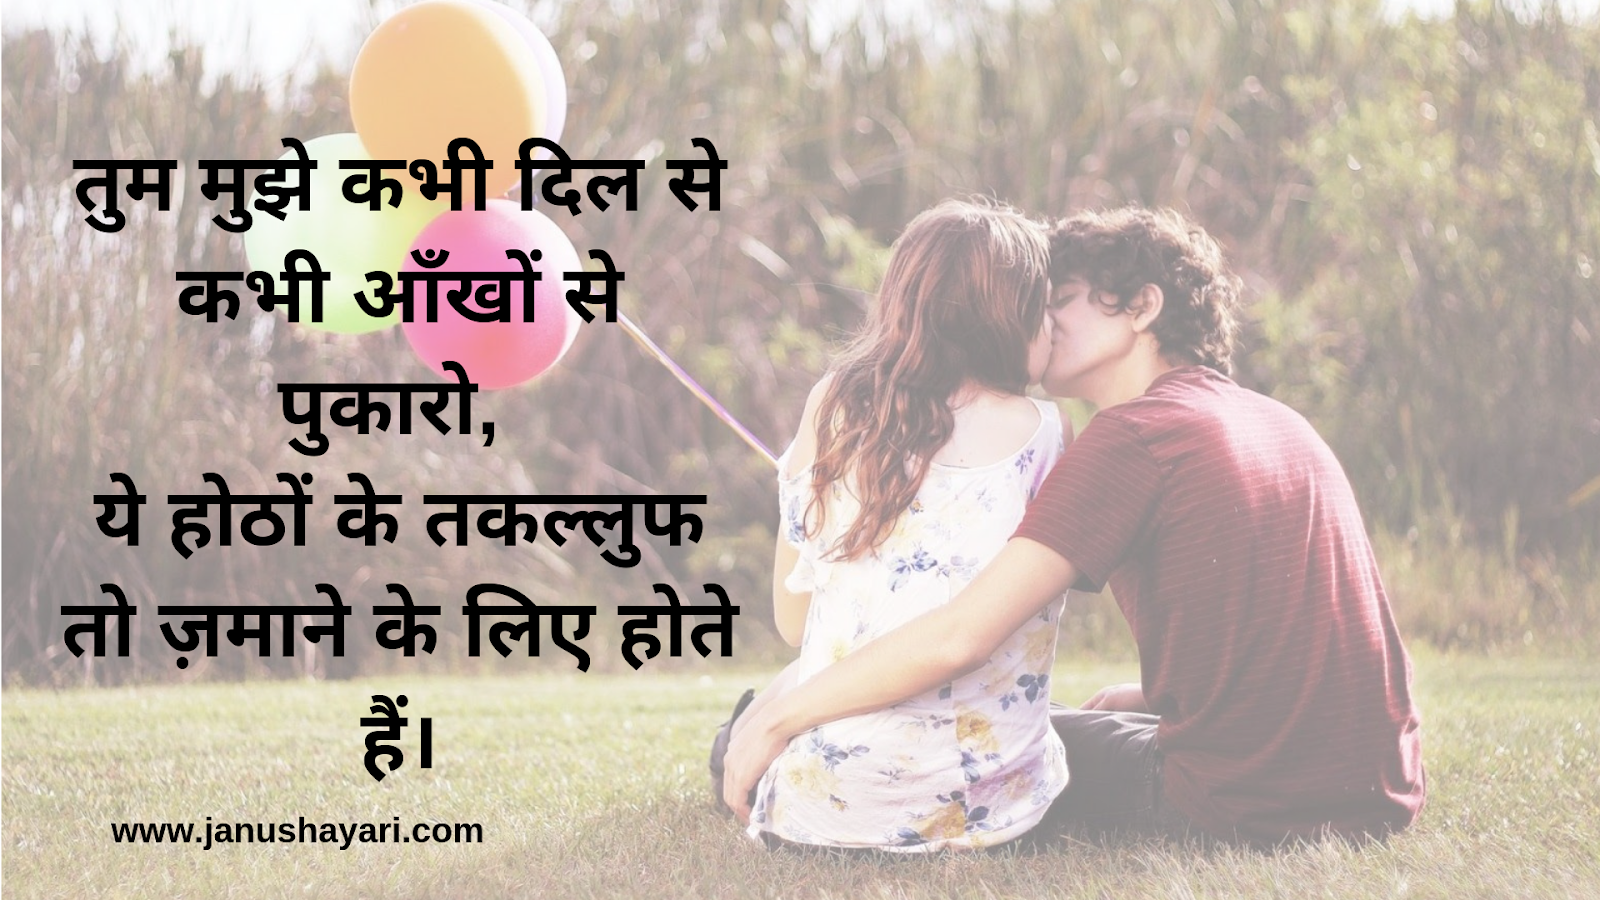 Love Couple Shayari In Hindi Hd Image - Love Couple Images Download , HD Wallpaper & Backgrounds